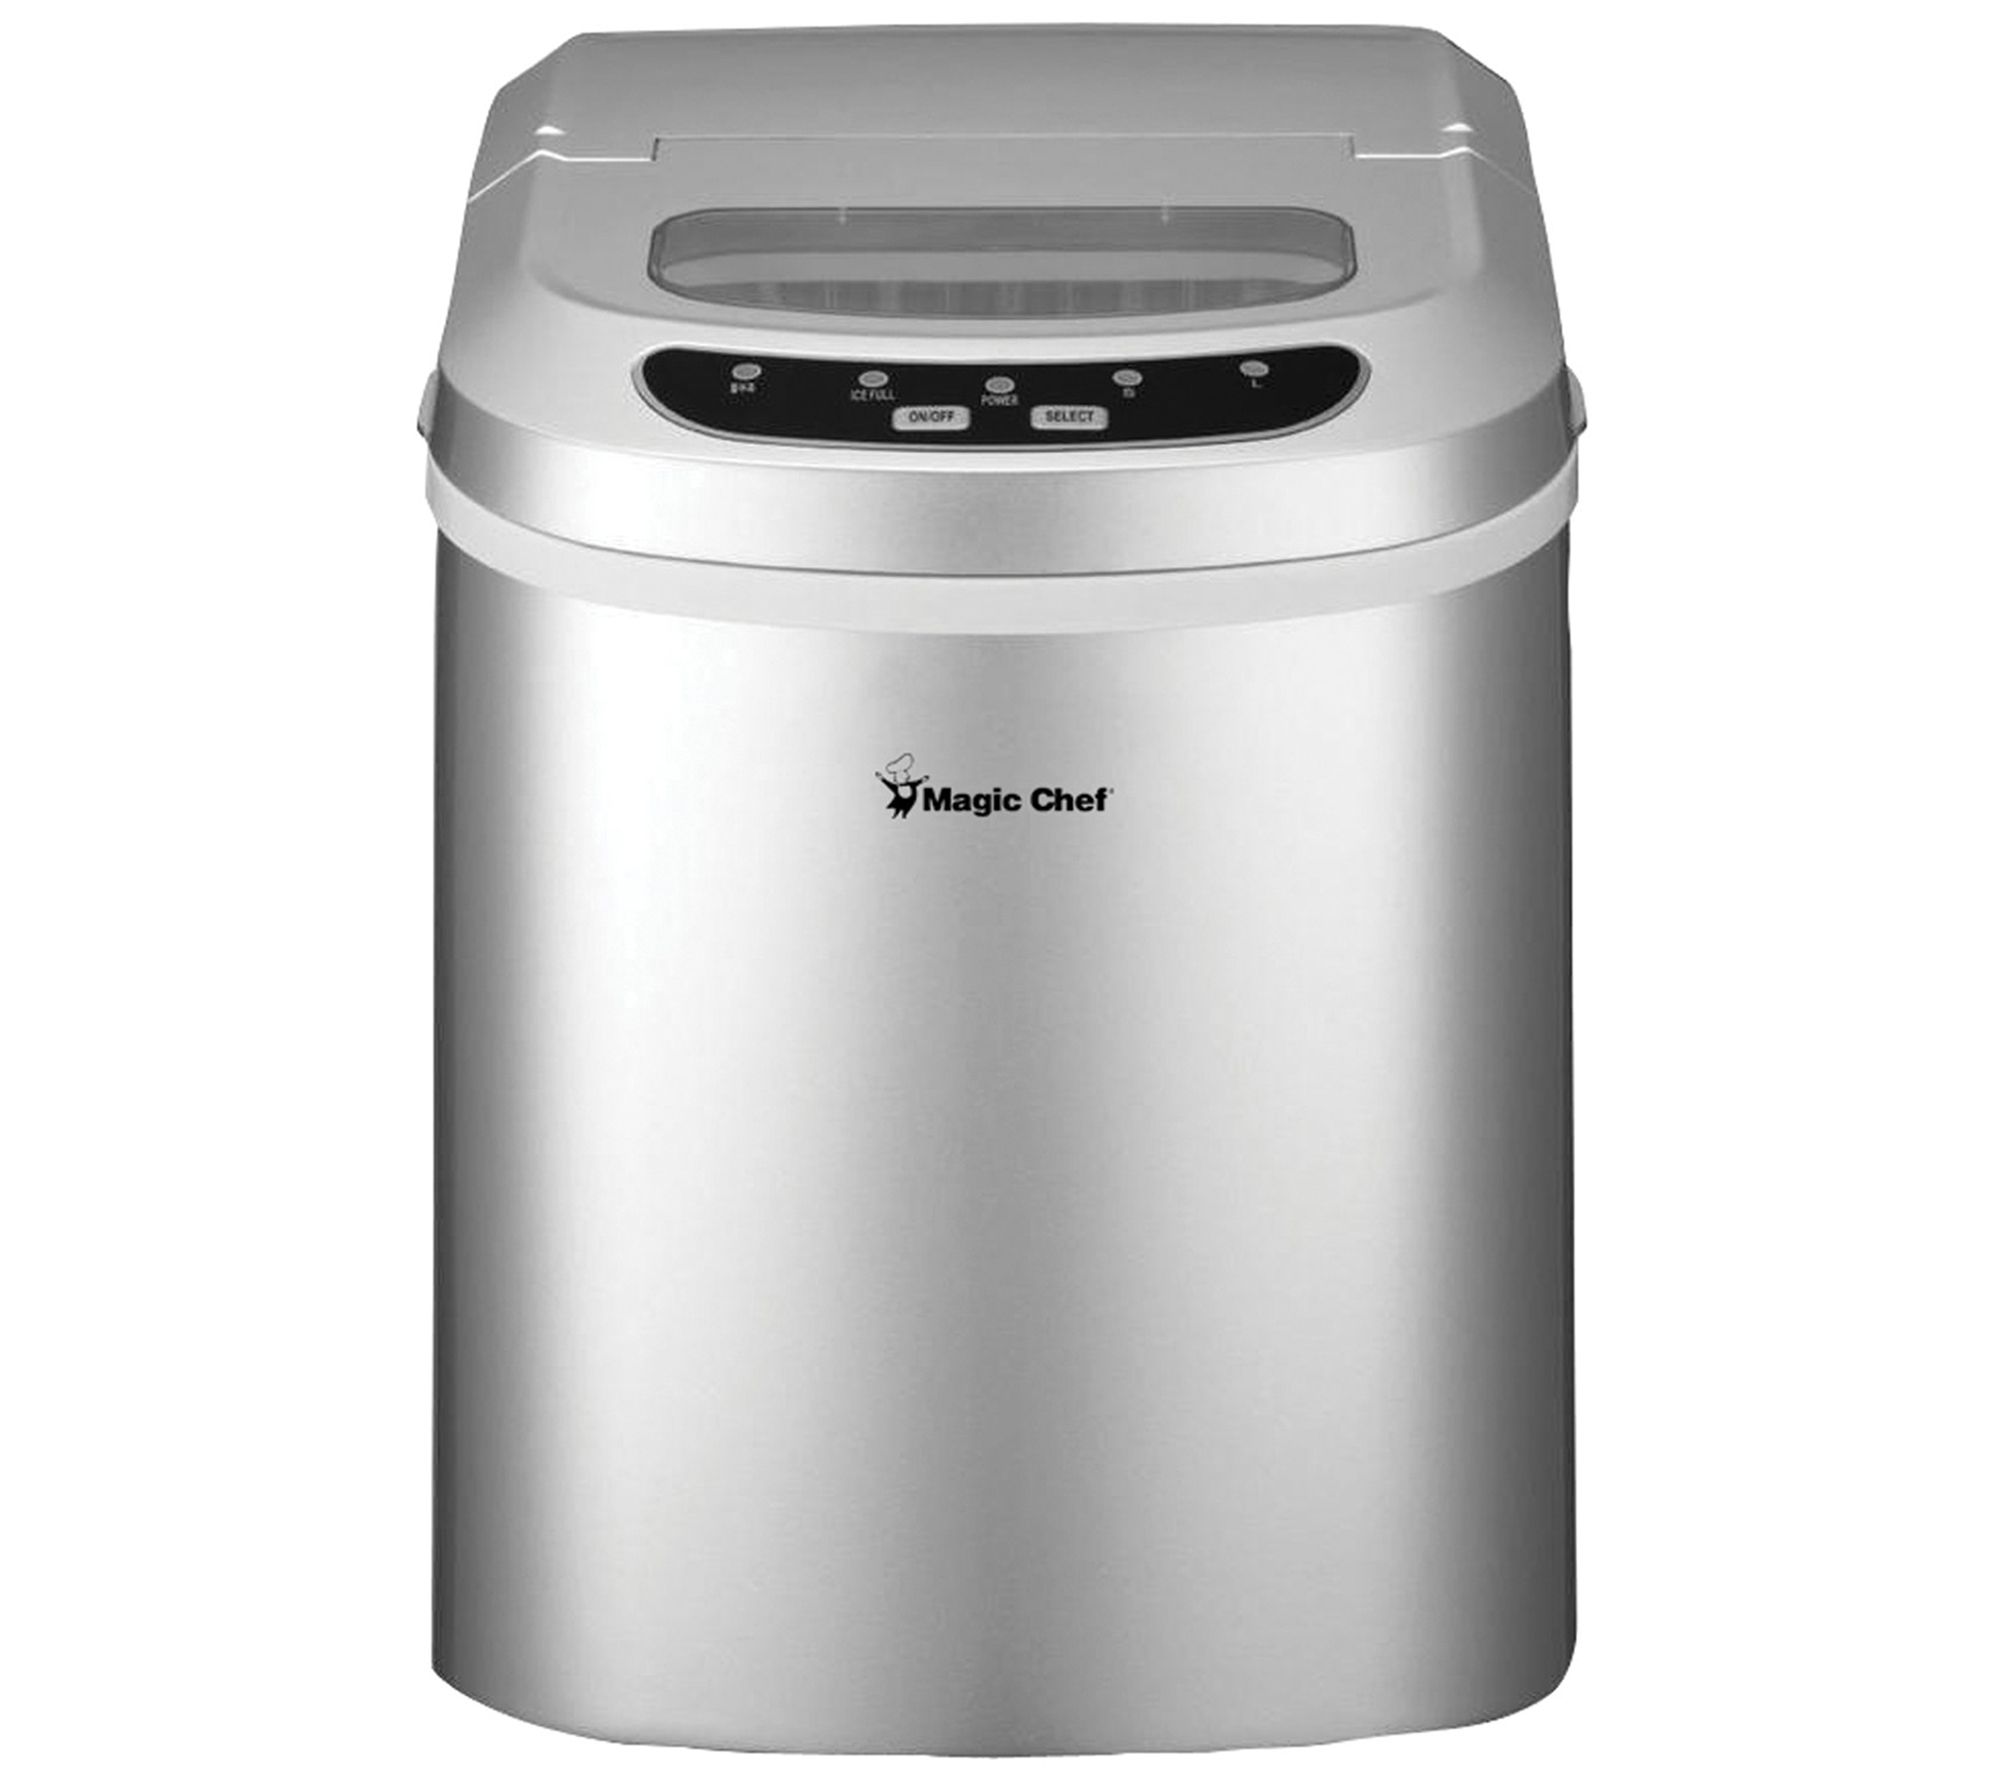 Magic Chef Portable Countertop Icemaker Icemaker Review - Consumer